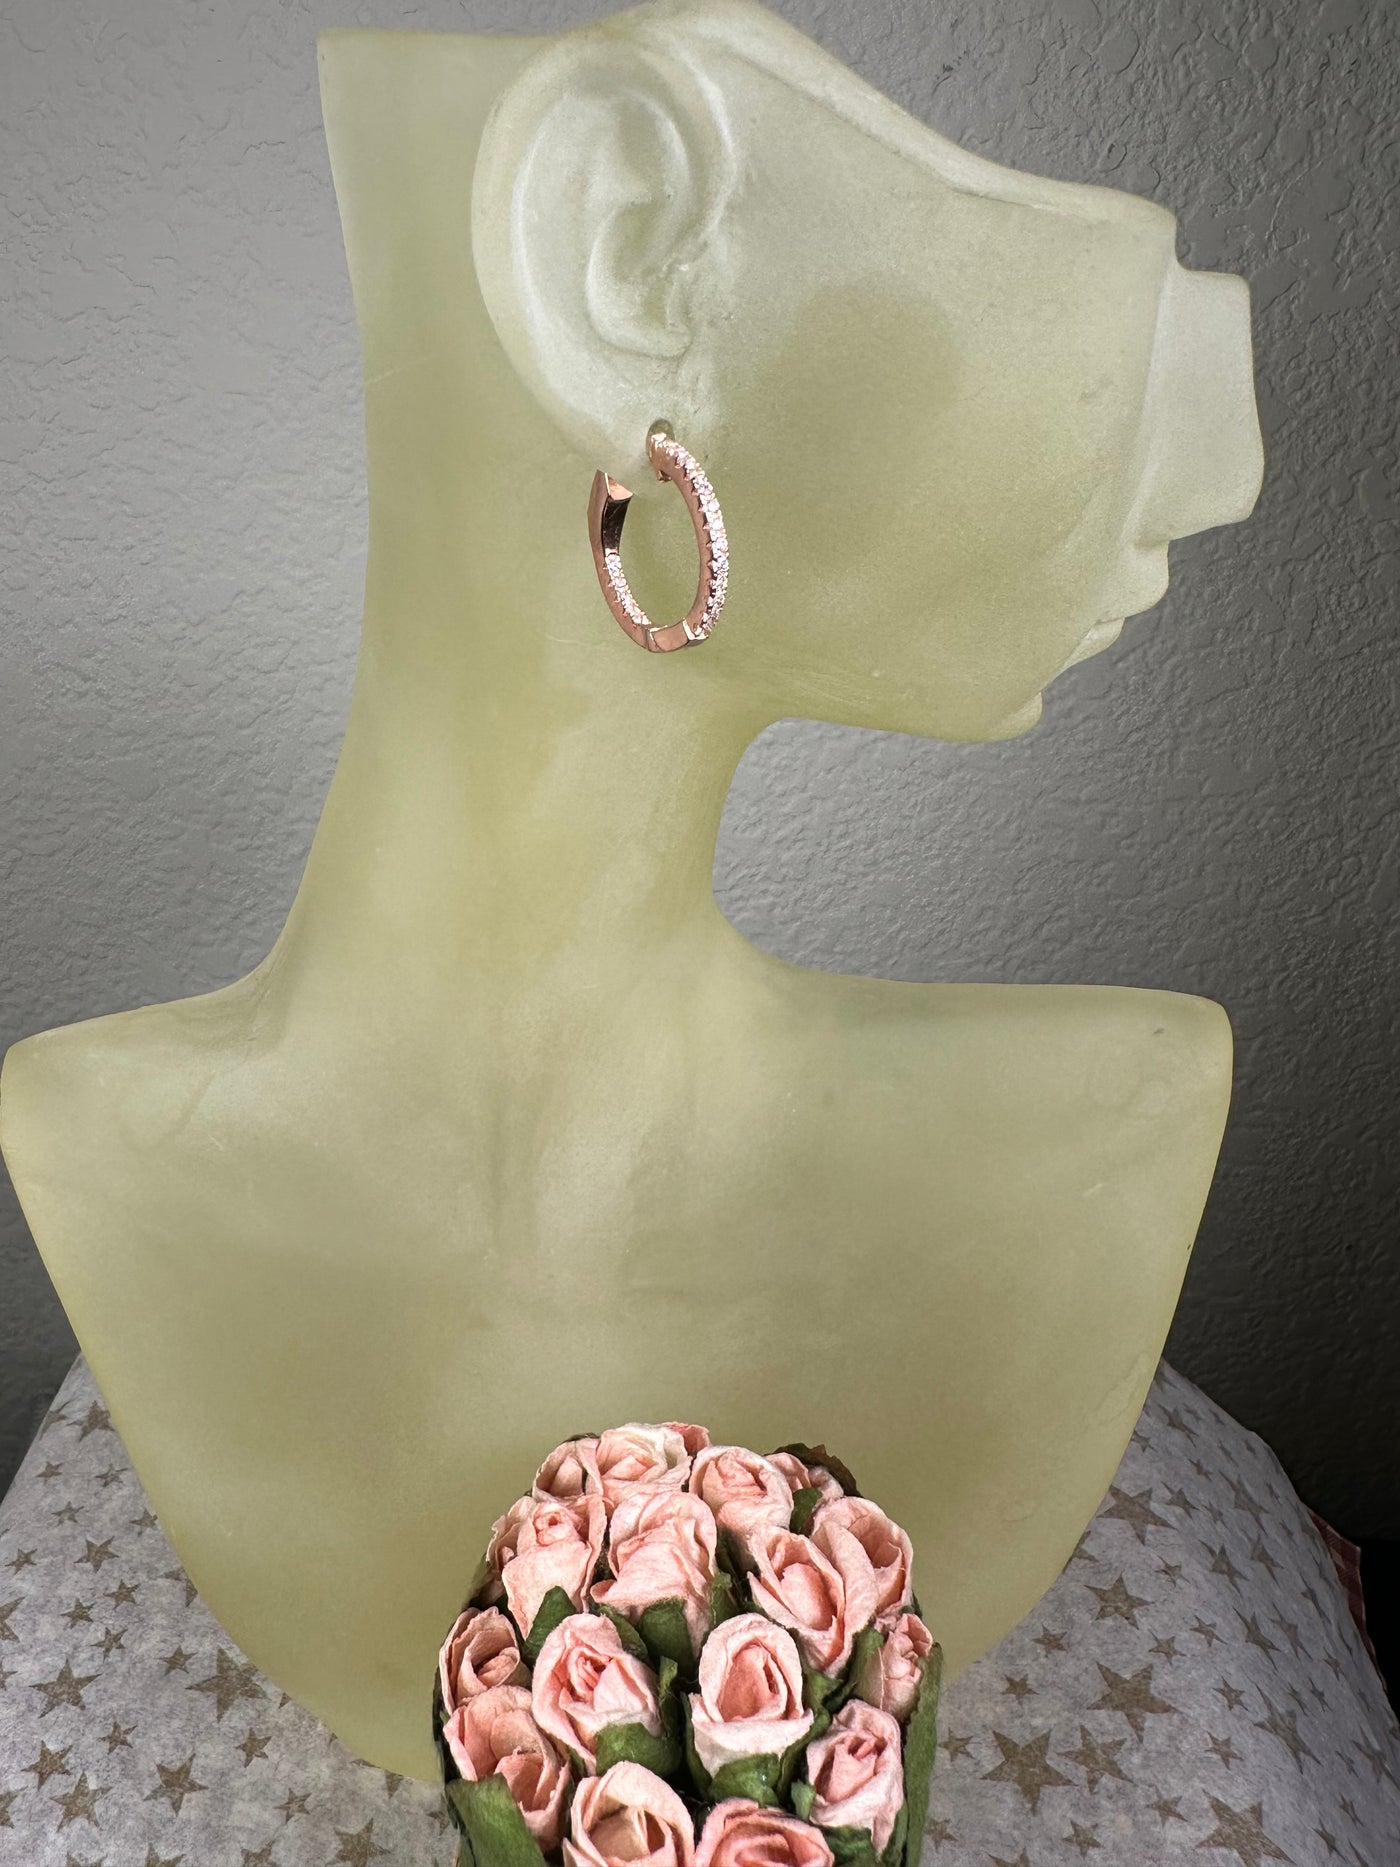 15mm Rose Gold Tone Hoop Earrings with Pave Set Cubic Zirconia